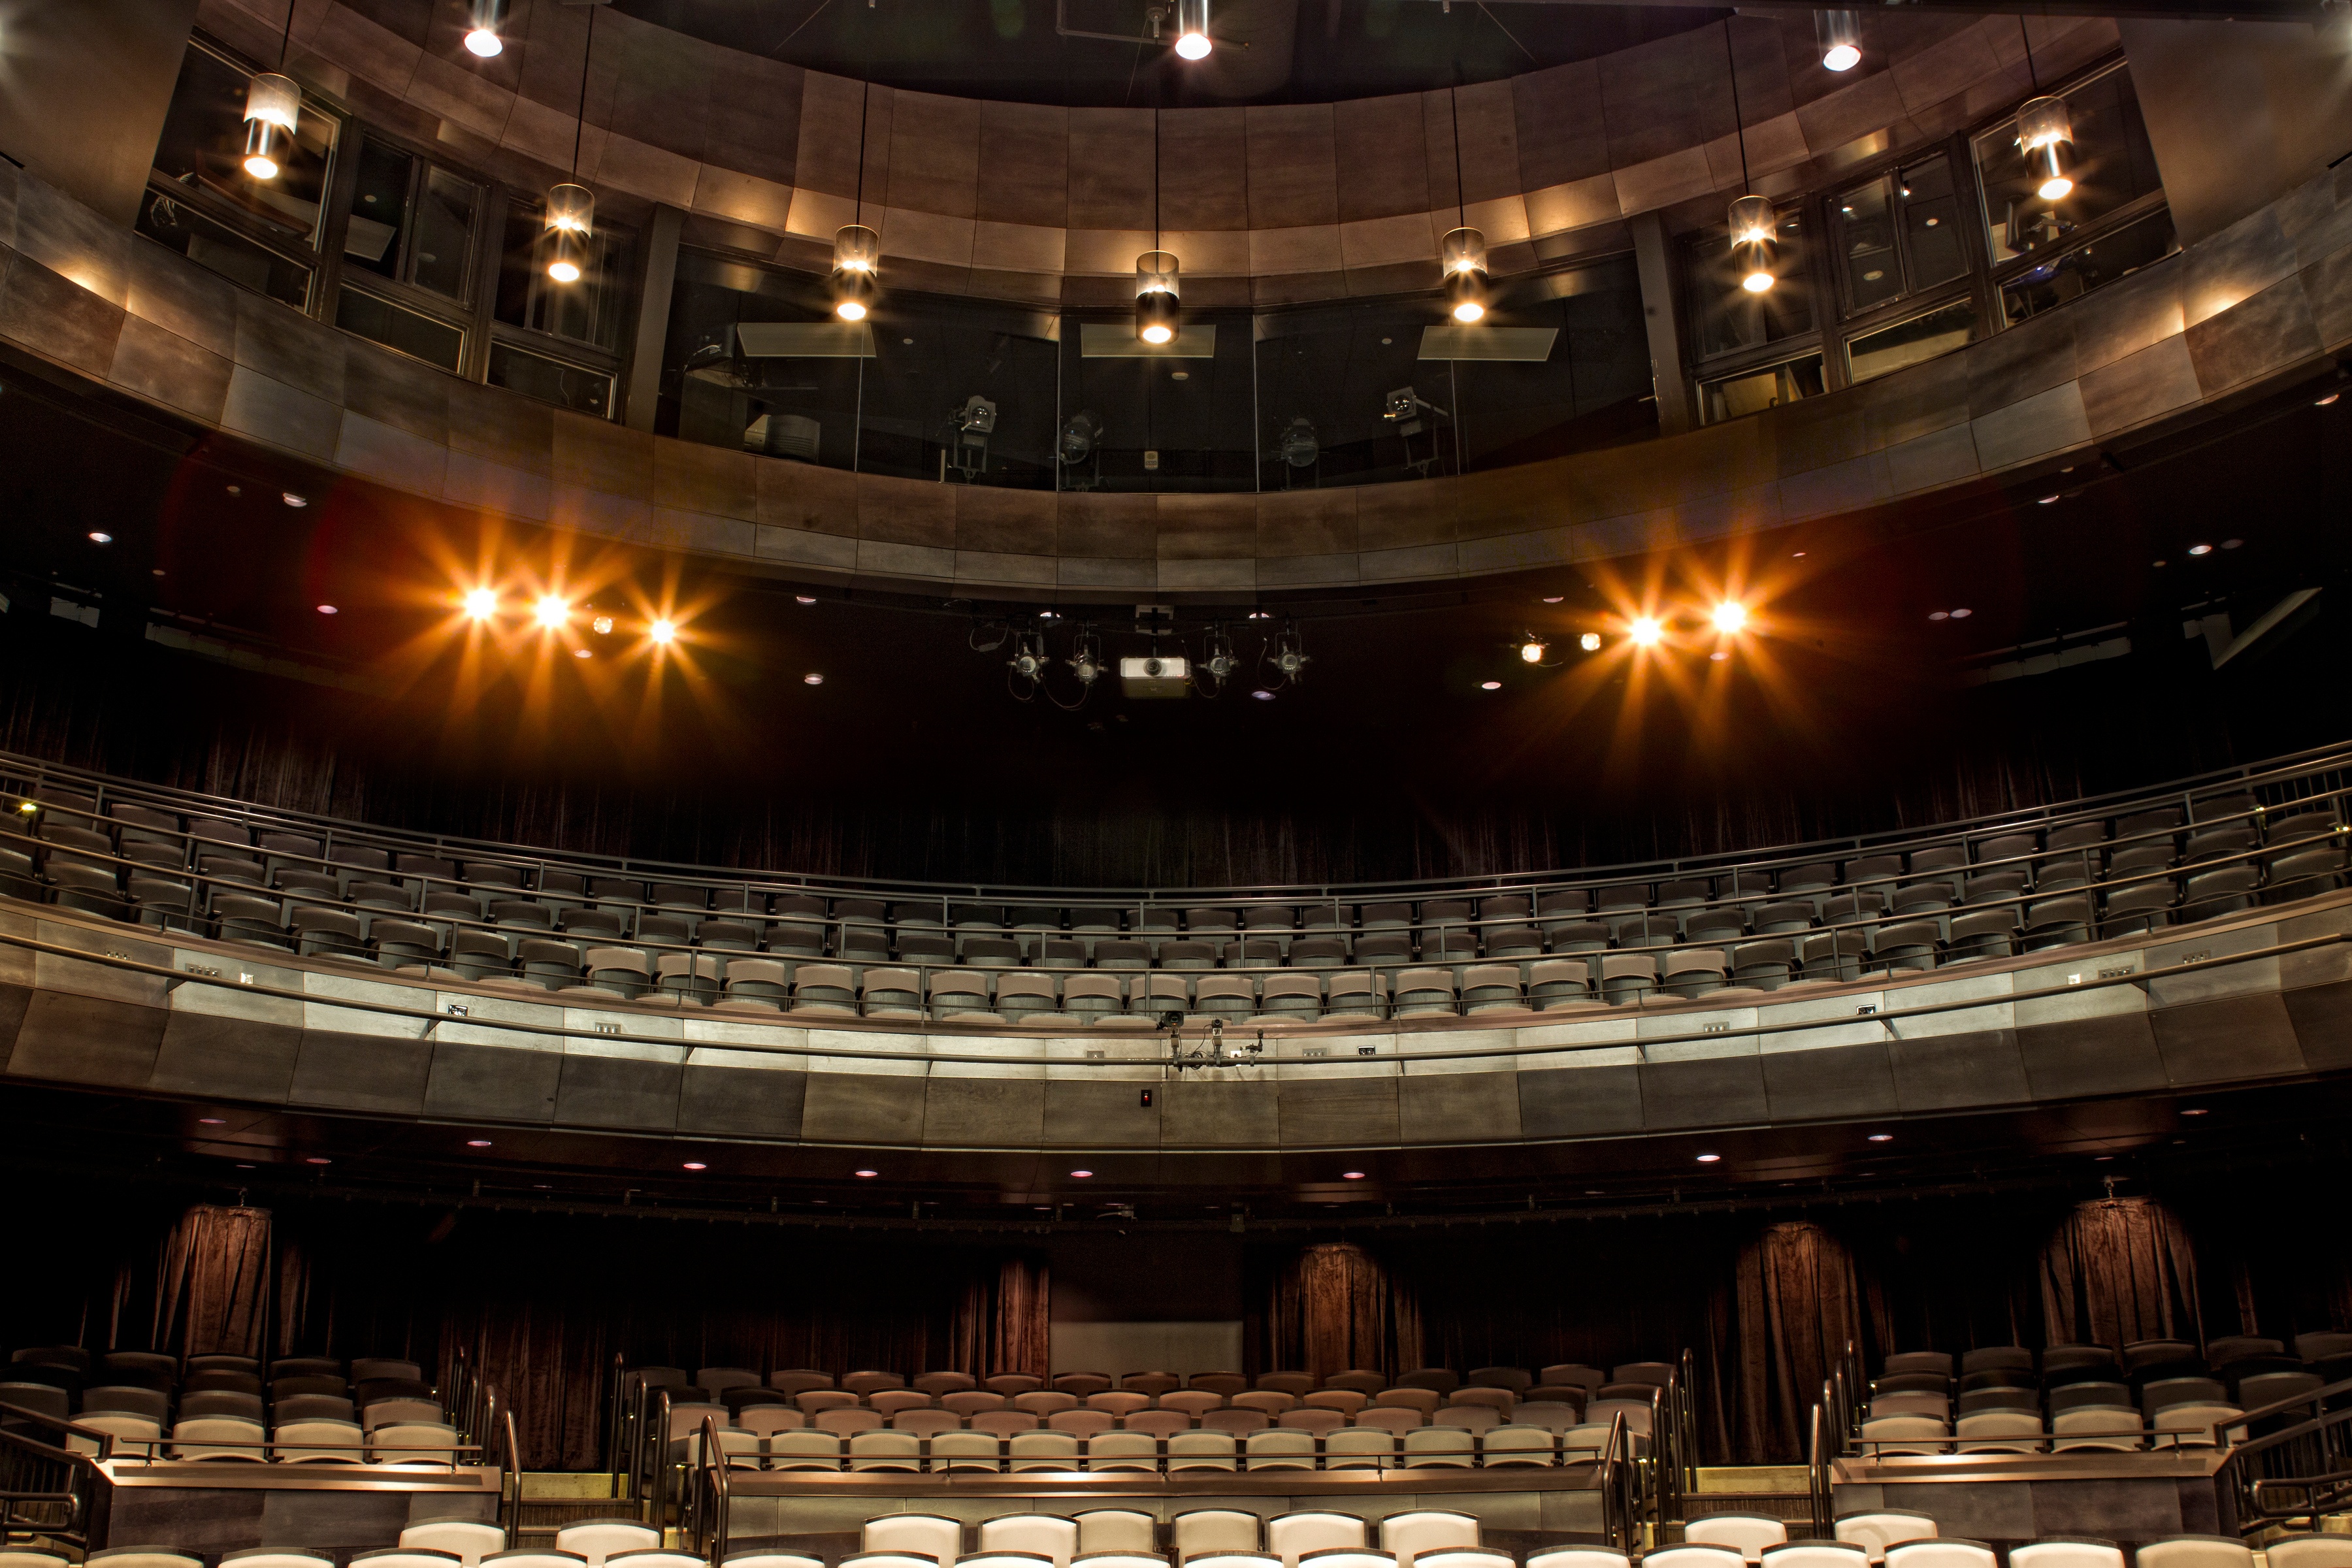 Interior of Donnell Theatre from stage